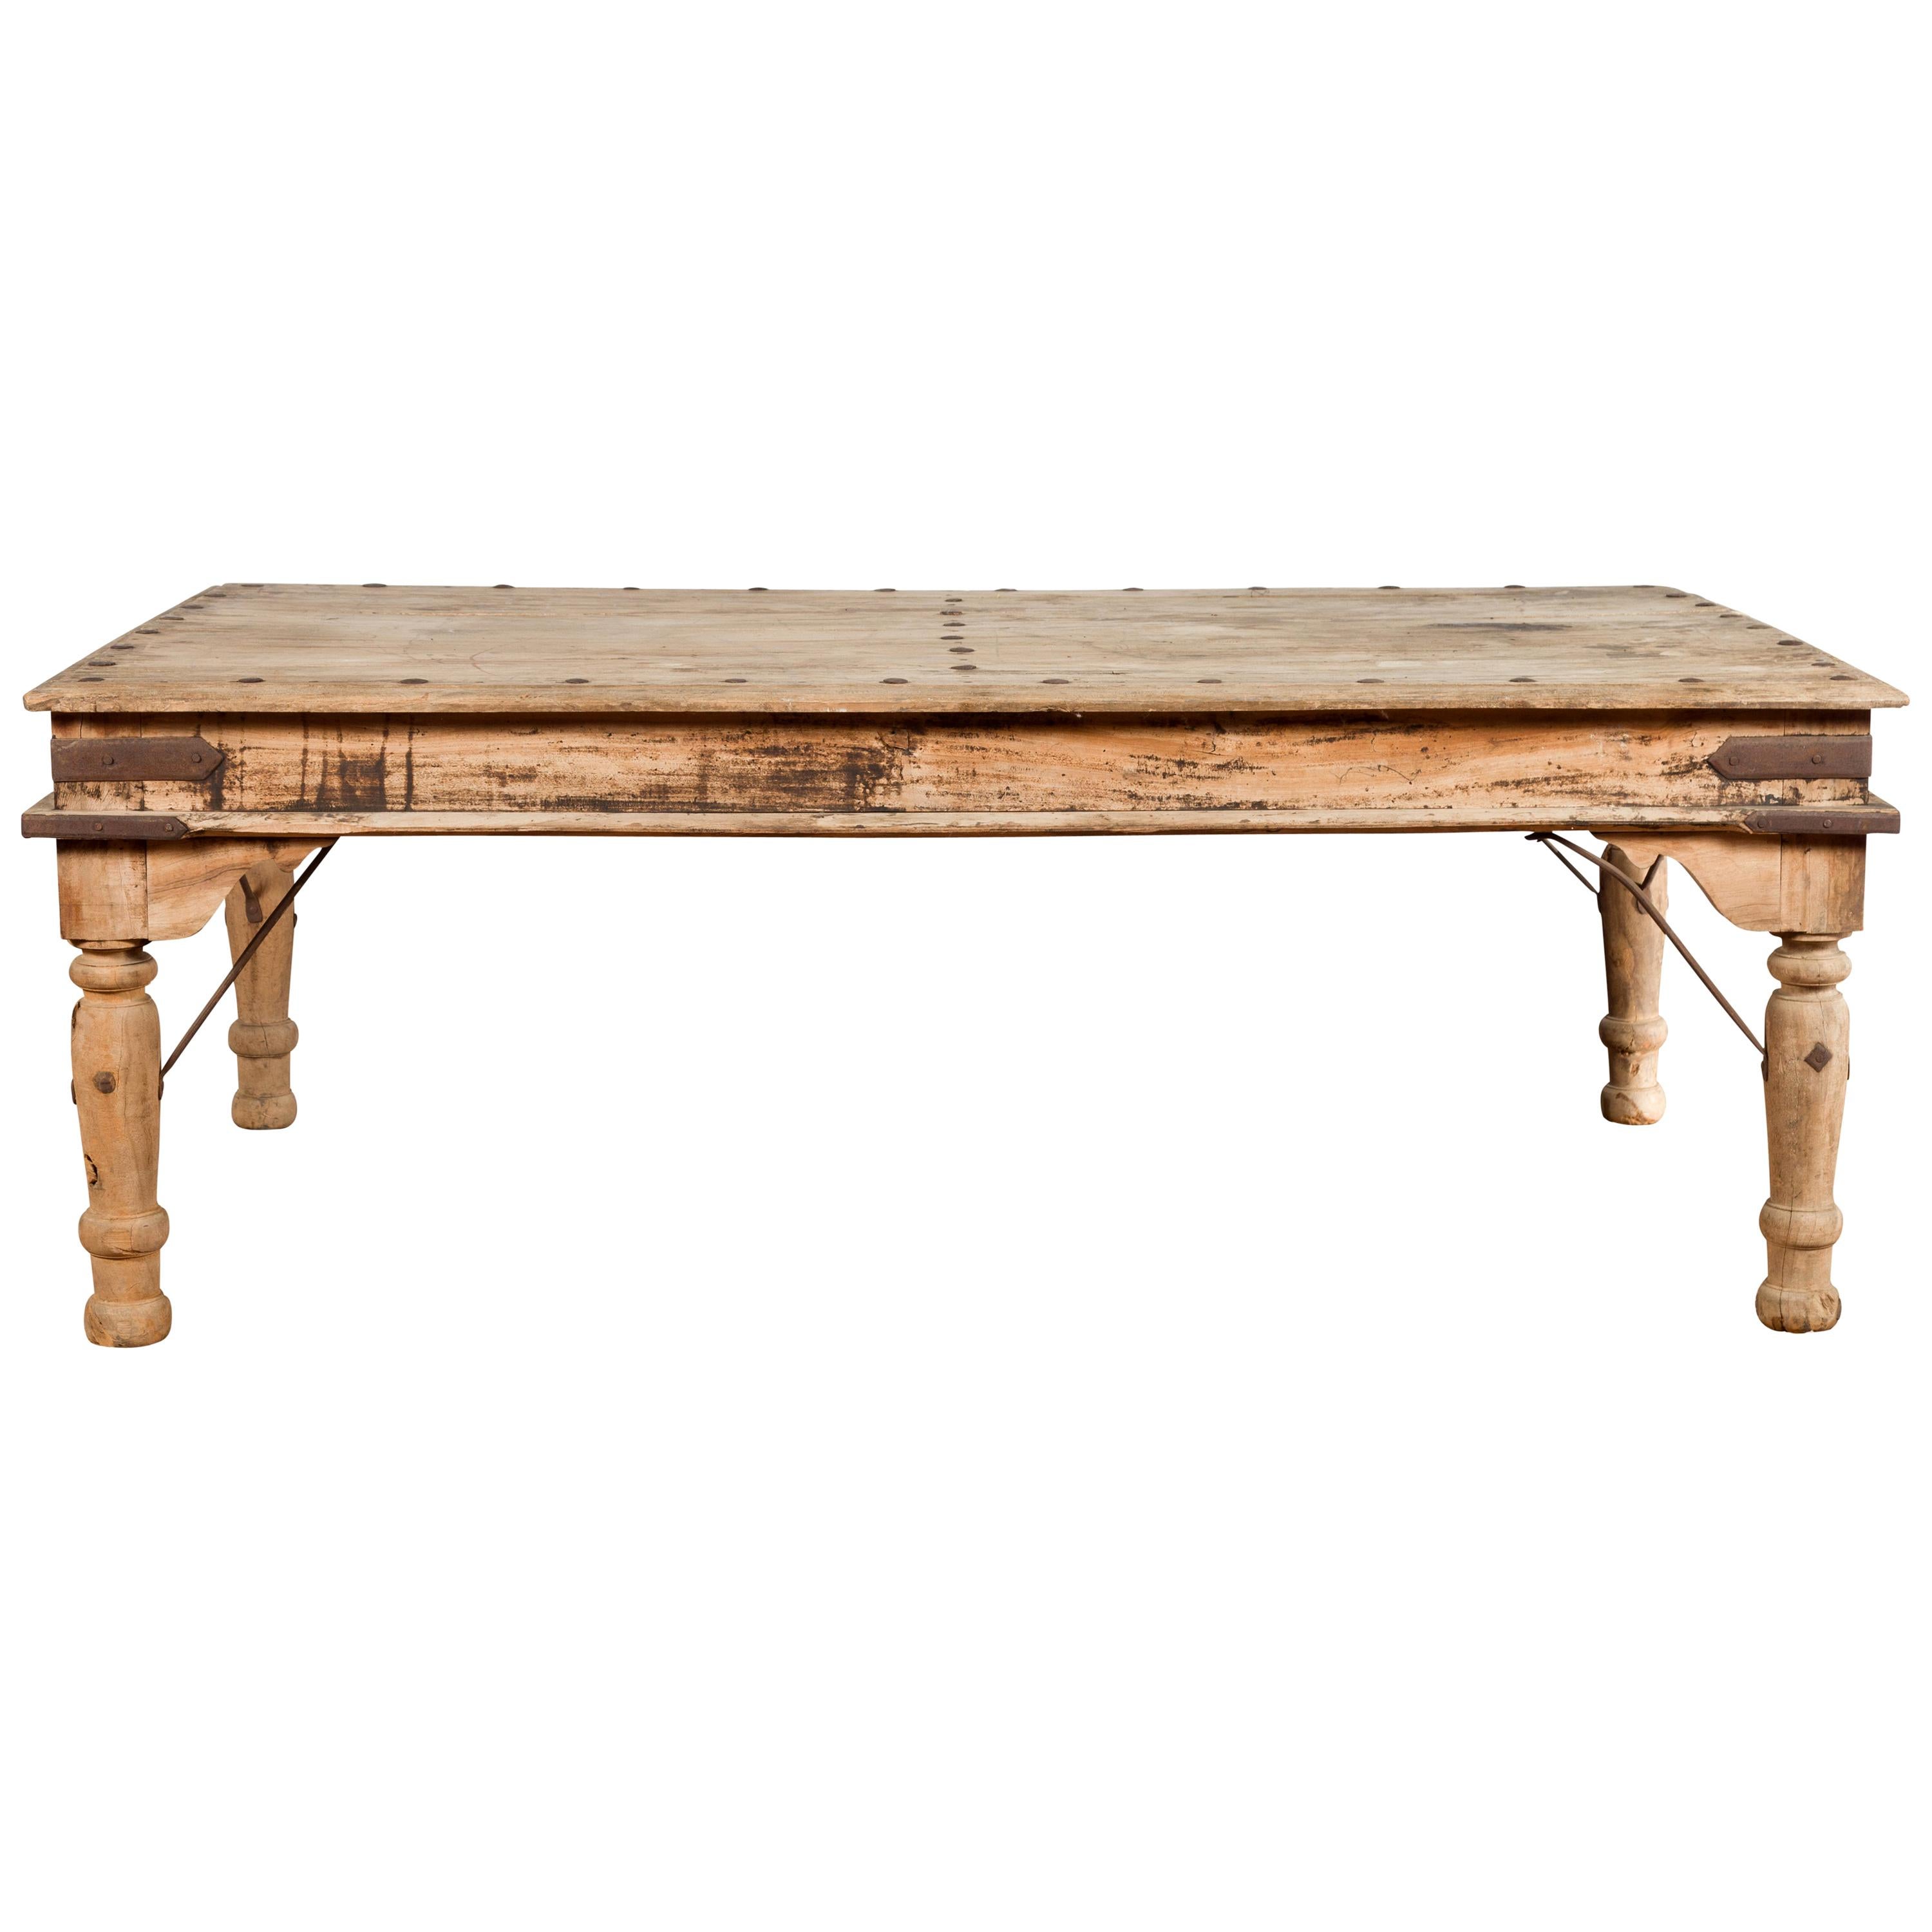 Rustic Indian Low Table with Distressed Patina, Iron Details and Baluster Legs For Sale